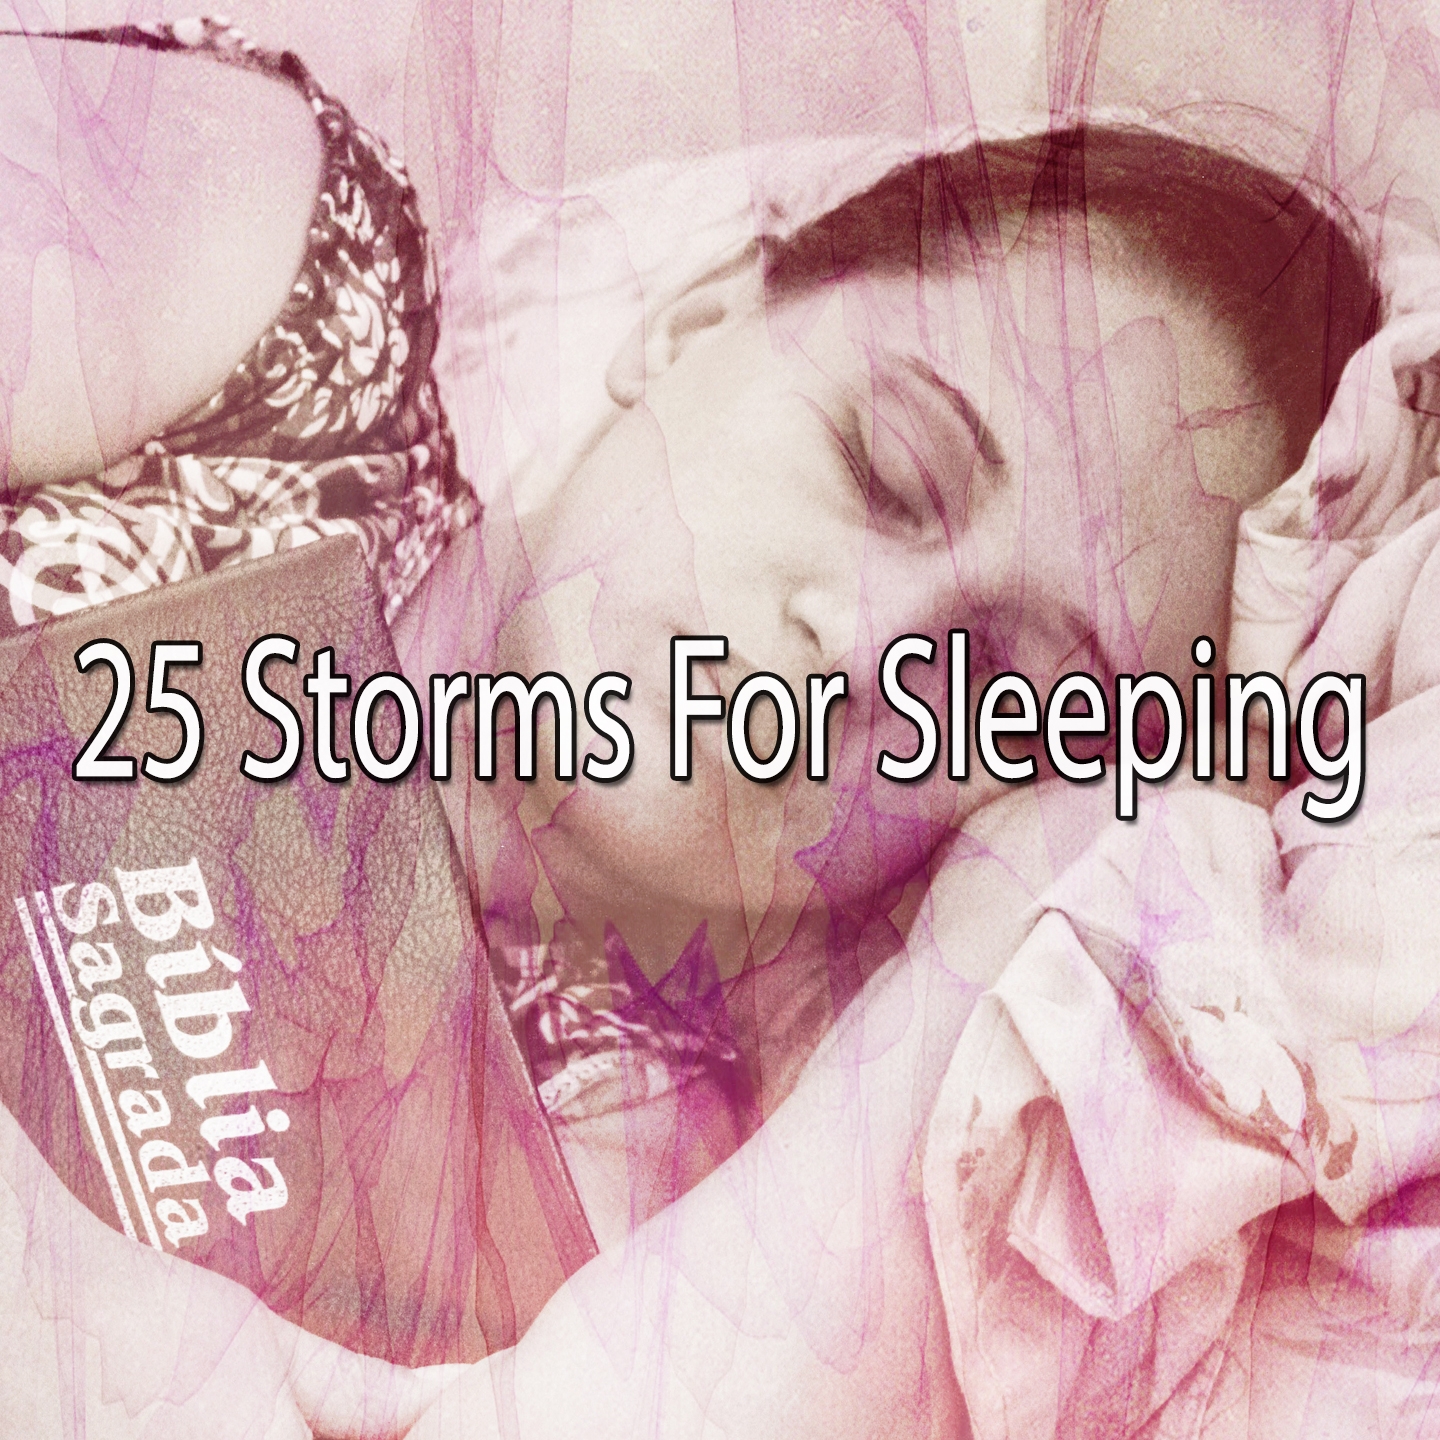 25 Storms For Sleeping